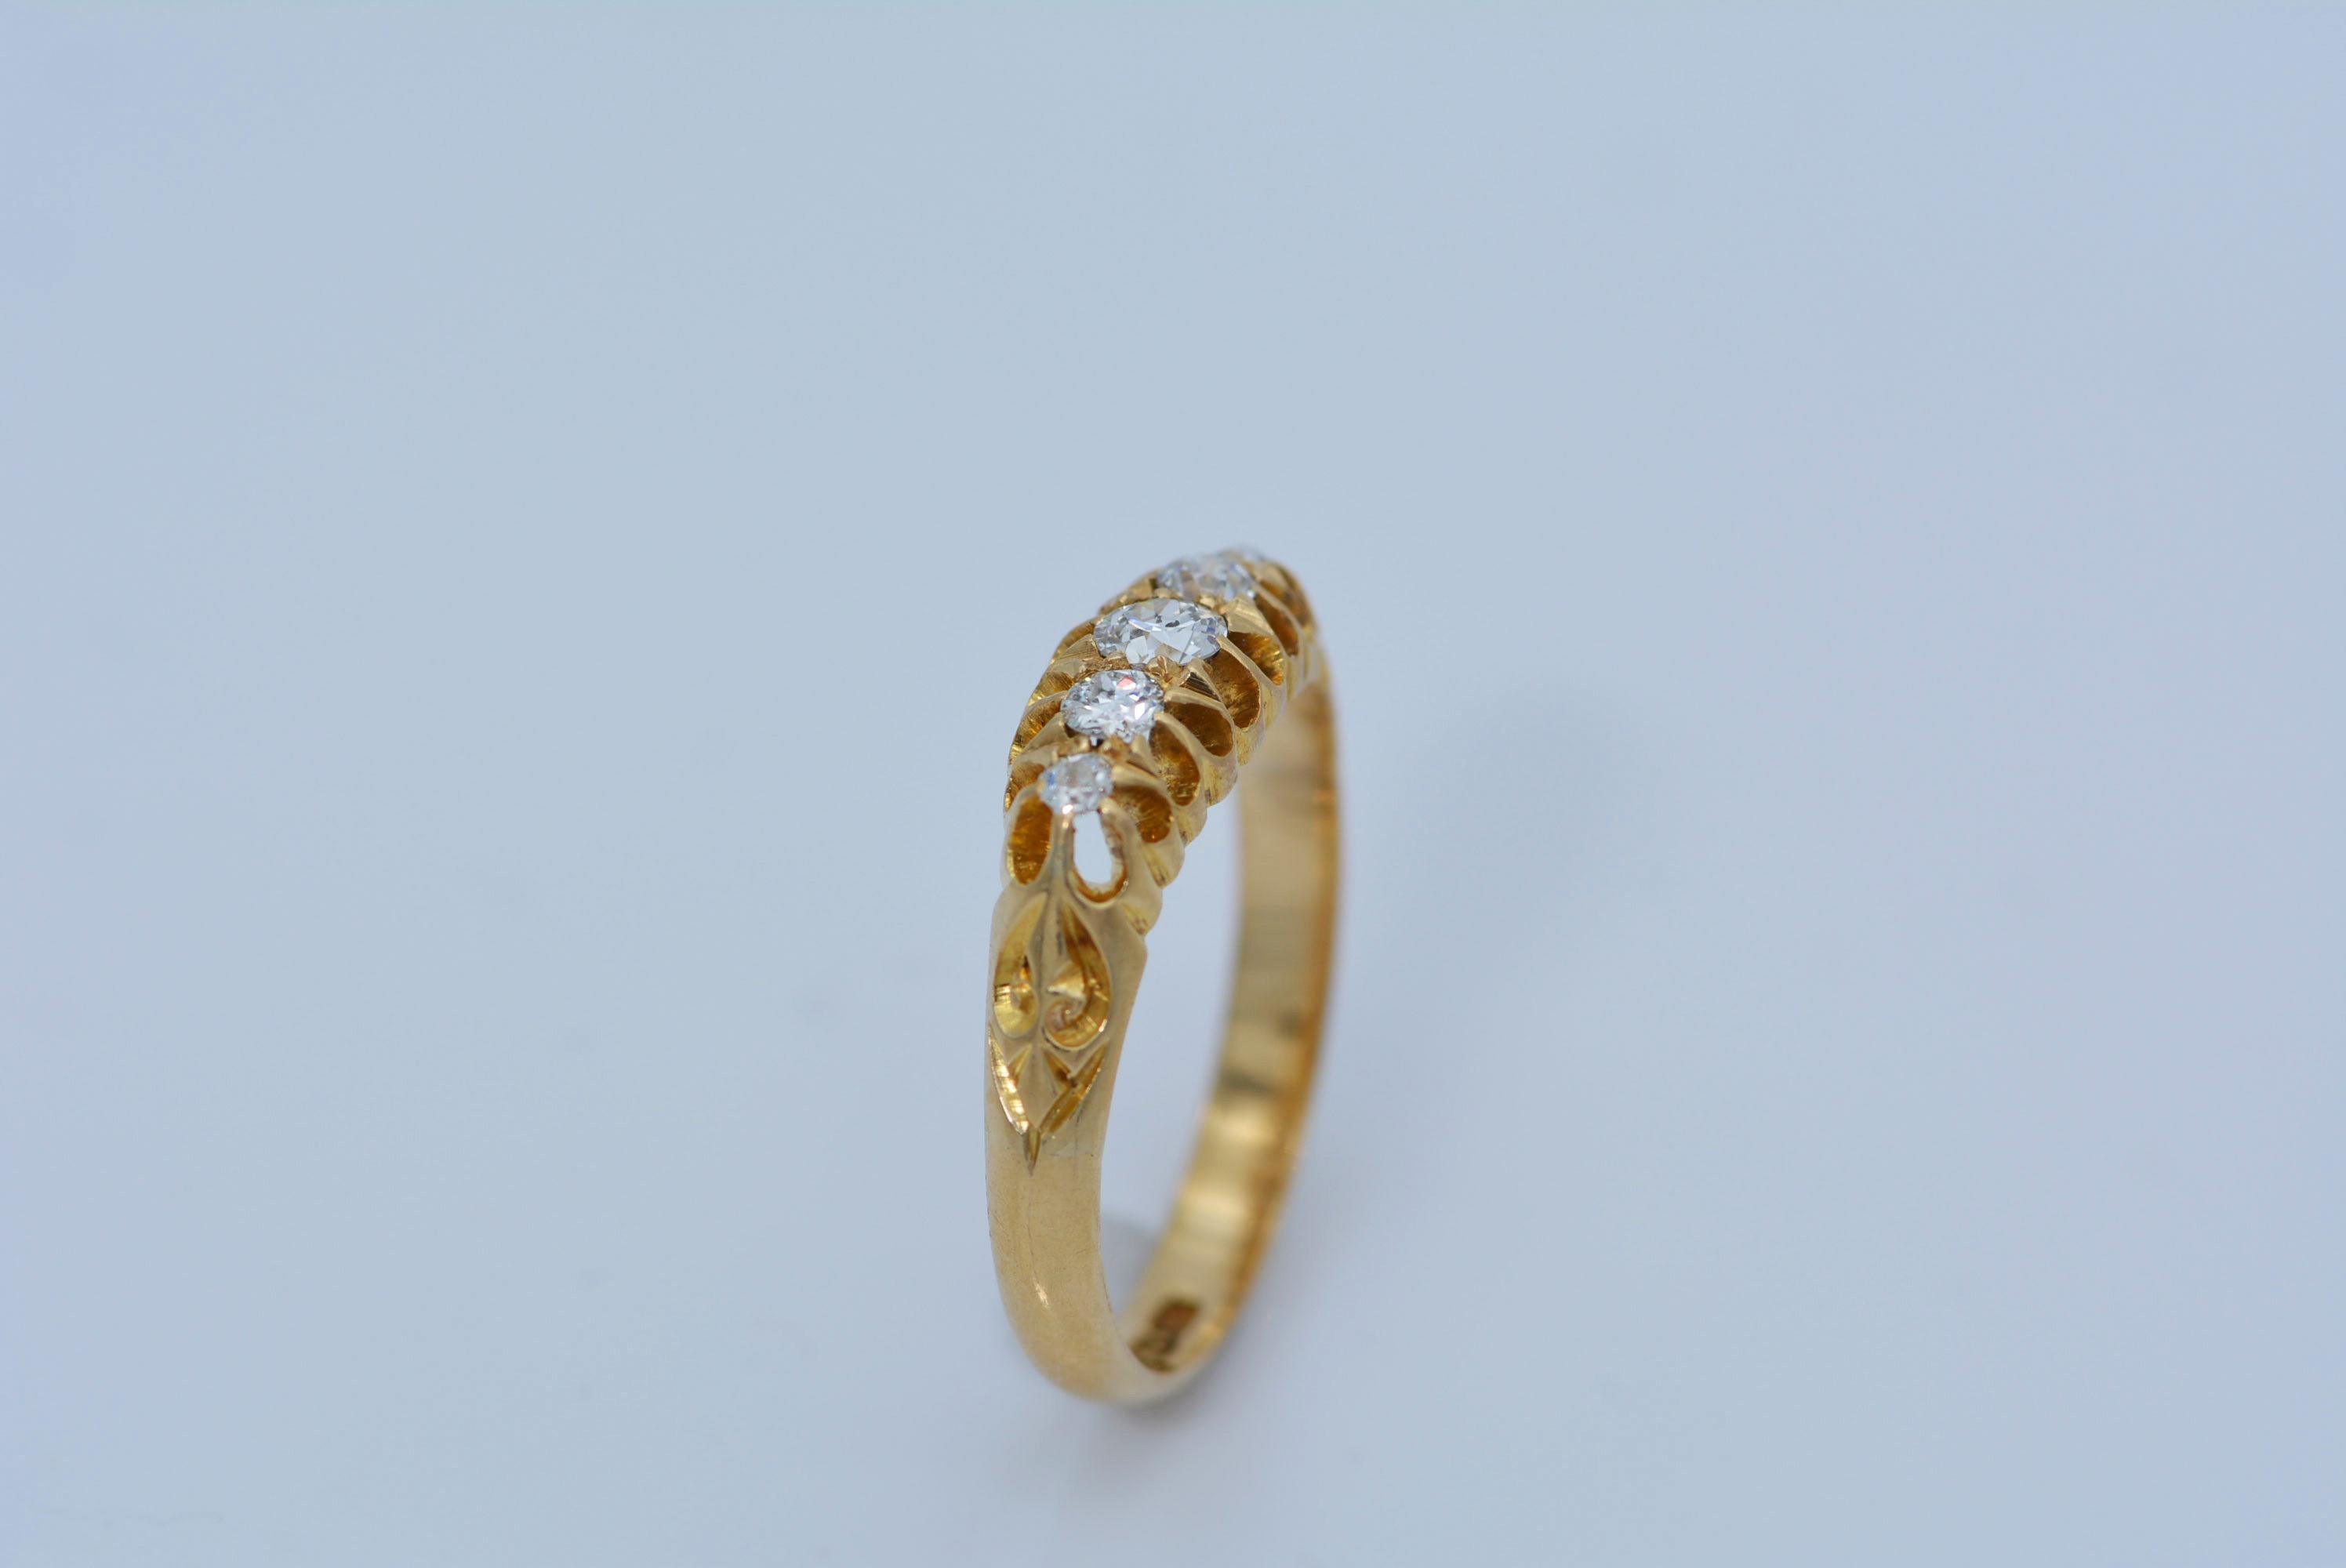 English Five Diamond Ring in 18 Karat Gold In Excellent Condition For Sale In Aurora, Ontario